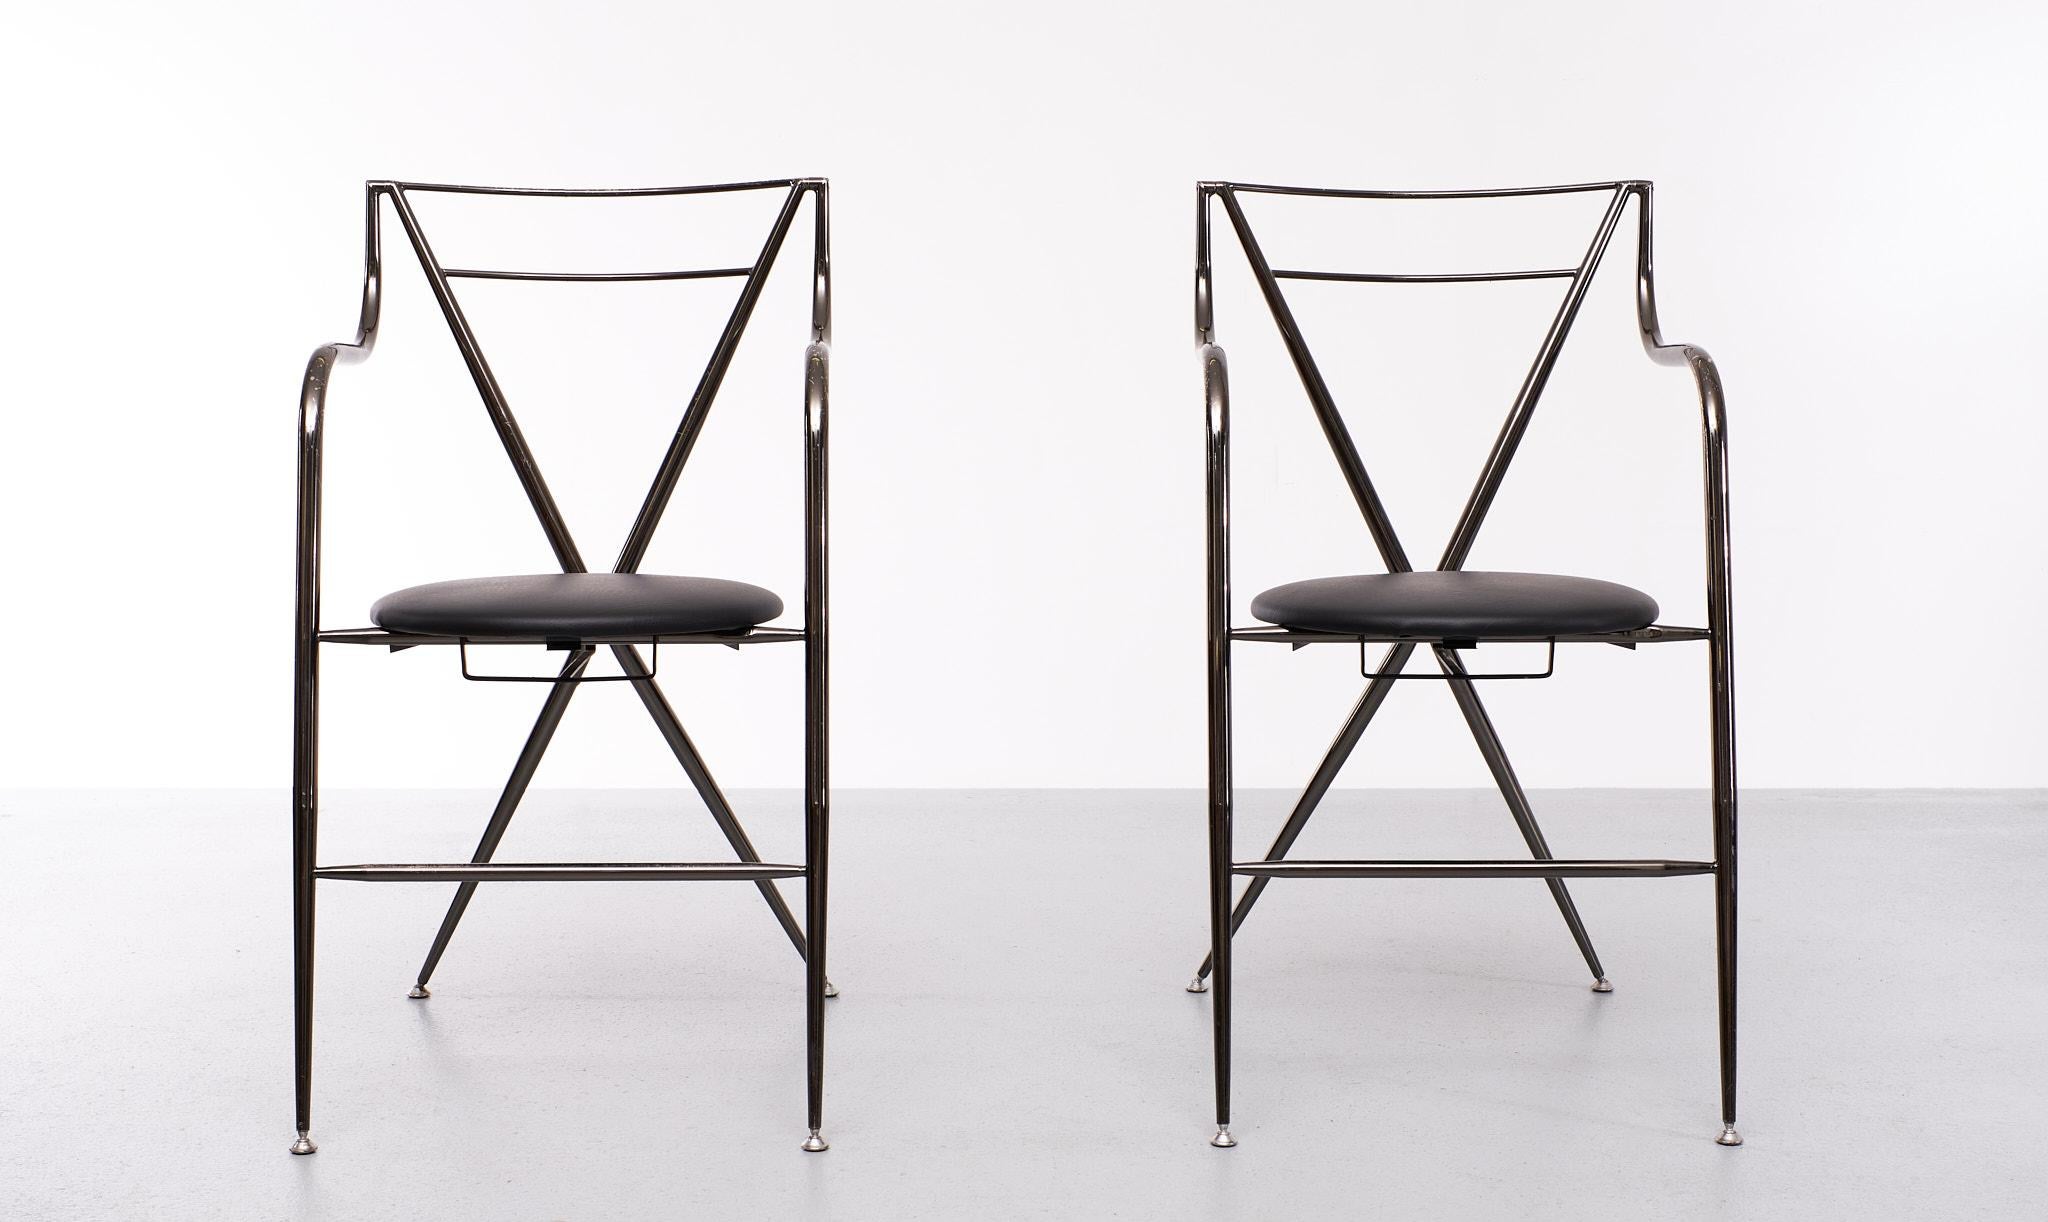 Pair of Hiroyuki Yamakado Cinderella folding stools for Arredi with new Faux leather seats. They are constructed of Black etching tubular steel and equipped with pivoting and anti-skid feet. These chairs are in good used condition 
Made in Paris,